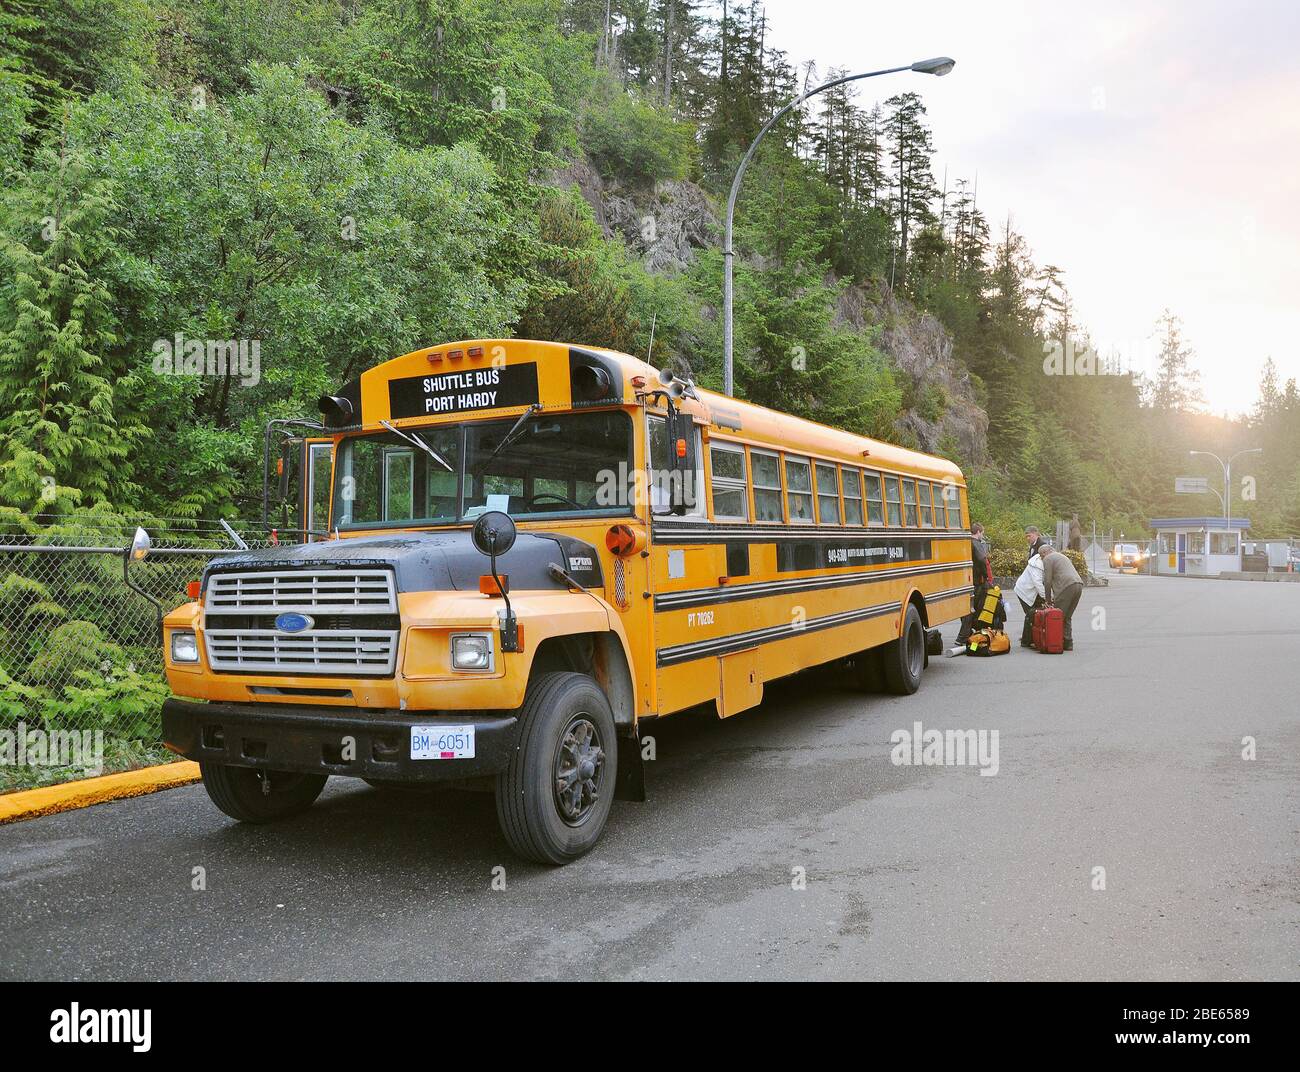 Shuttle bus stands in the port before the ferry to Prince Rupert departure. Stock Photo